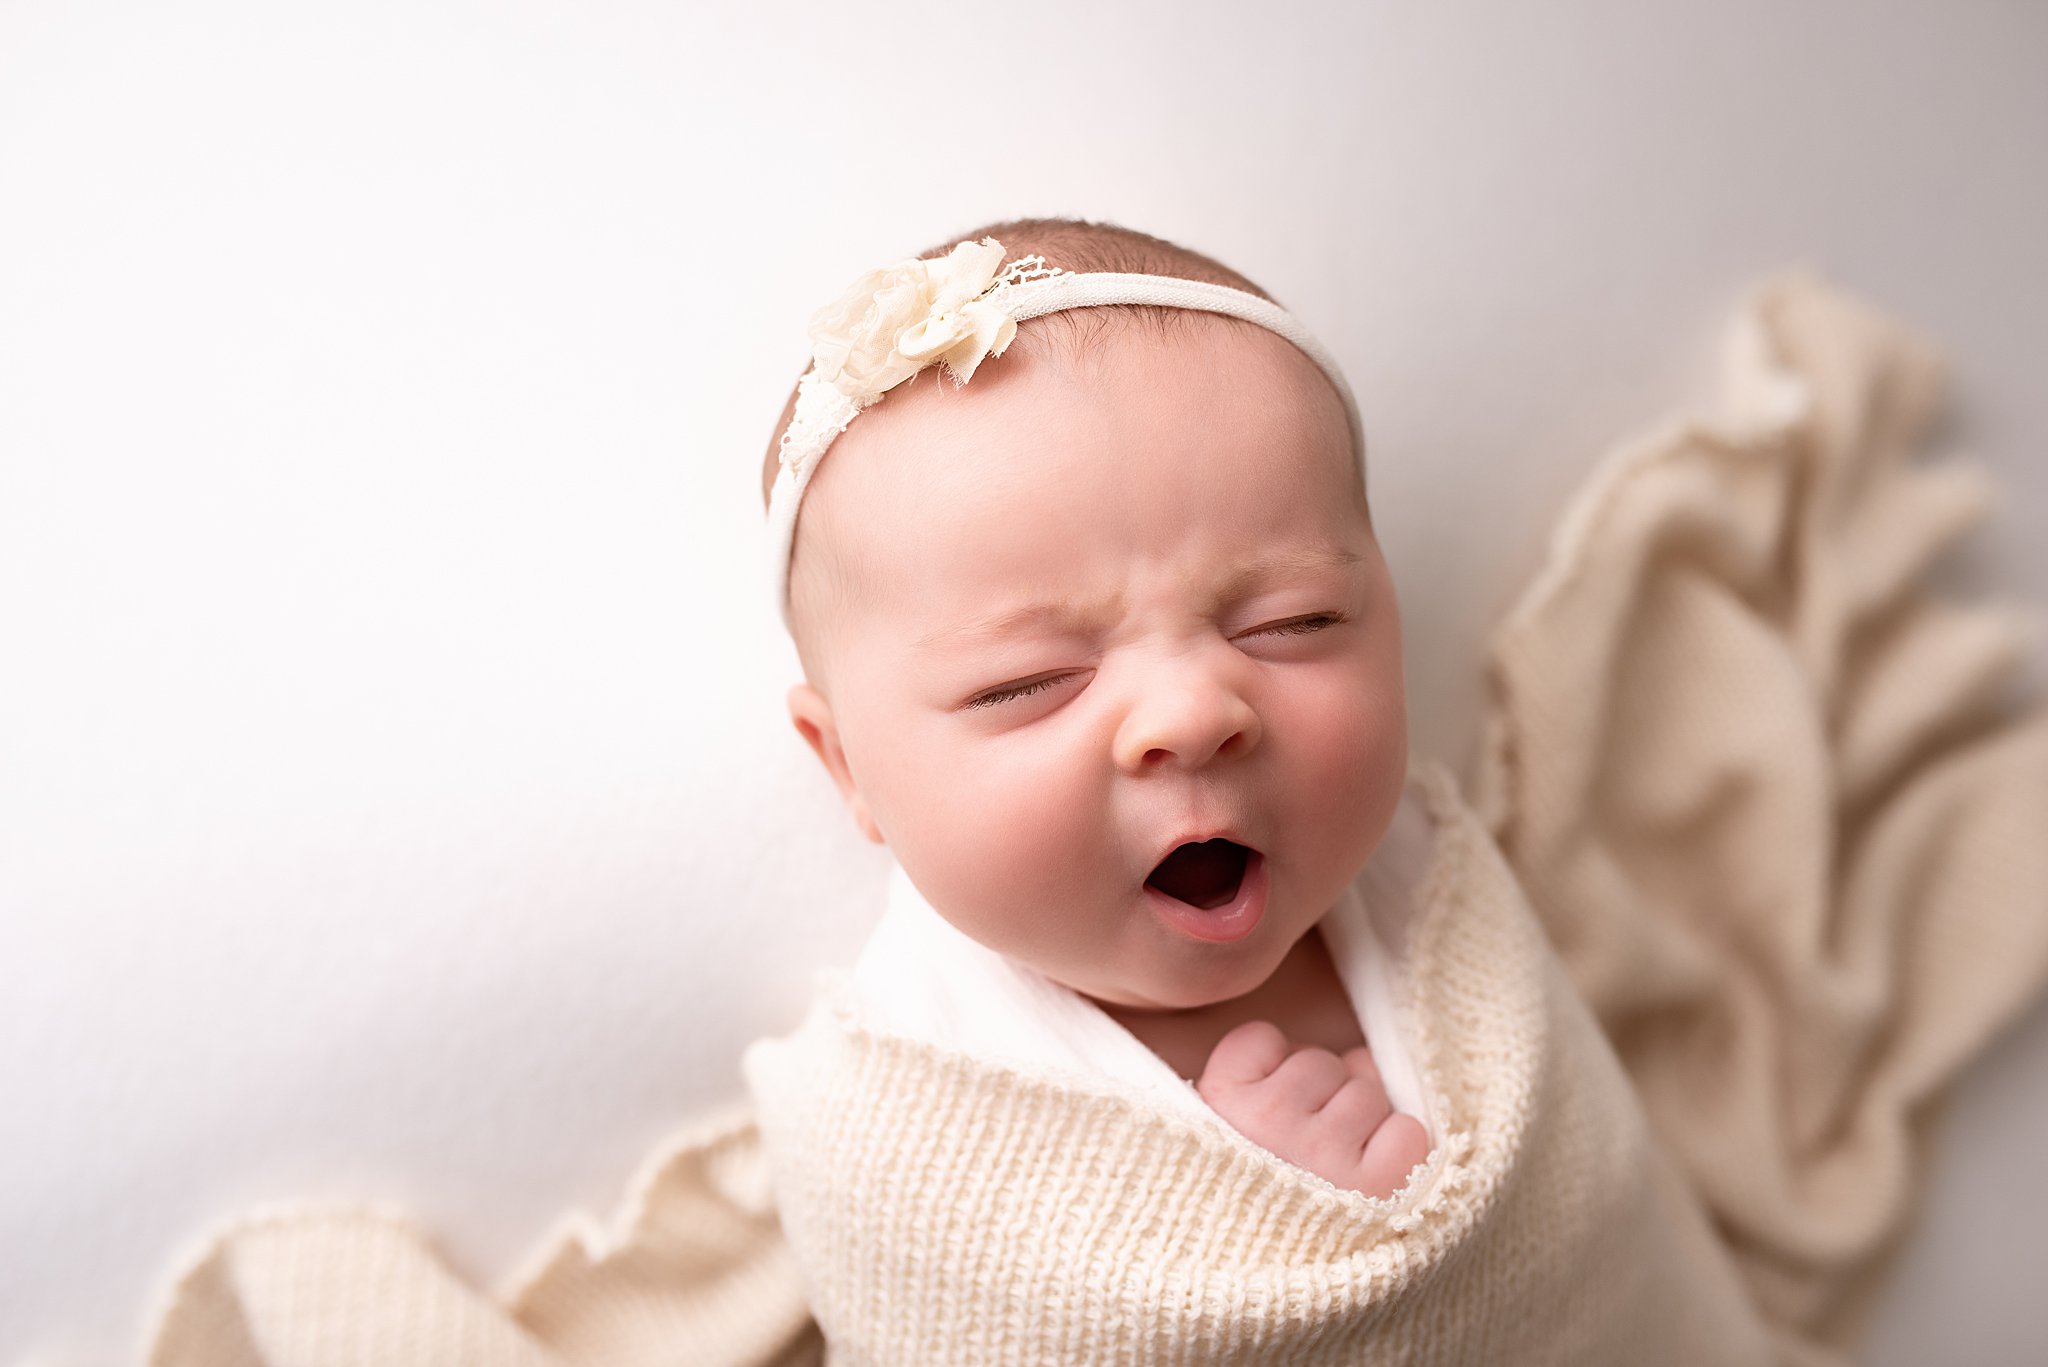 A newborn baby yawns while wrapped in a beige blanket luludew